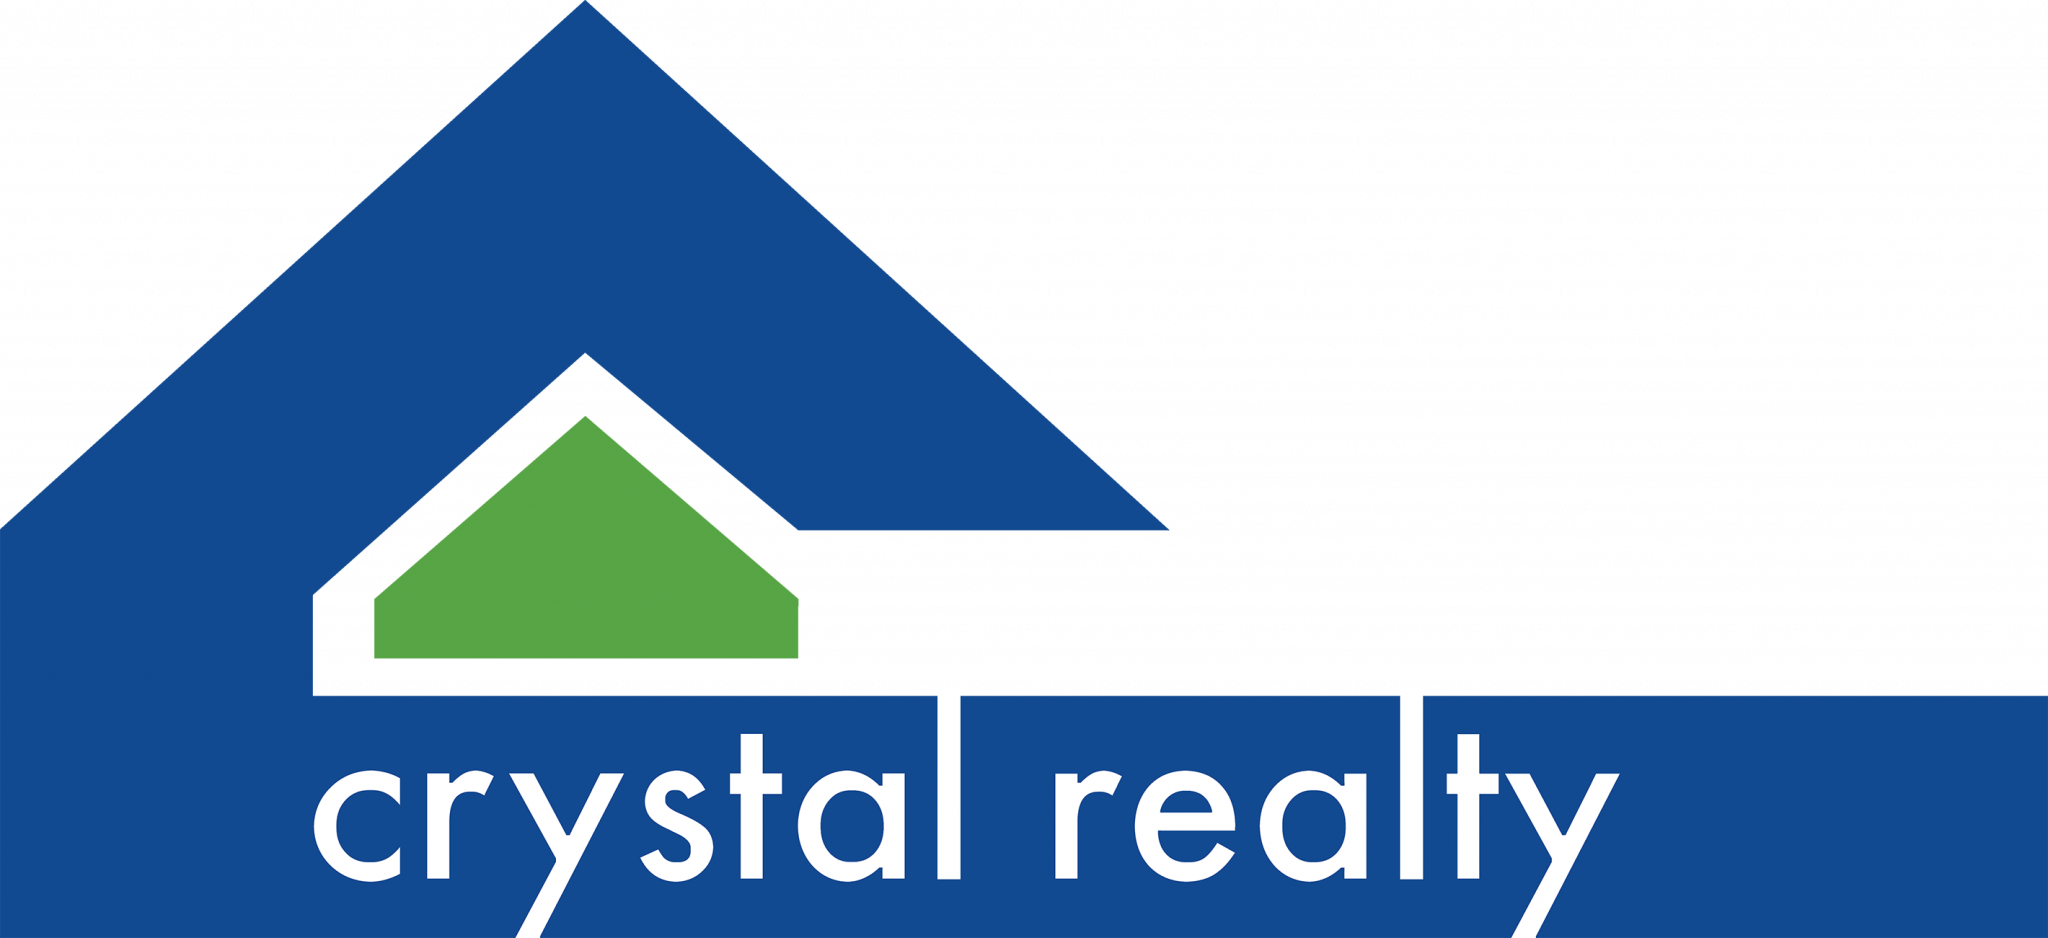 Real Estate Agency Crystal Realty - Newtown